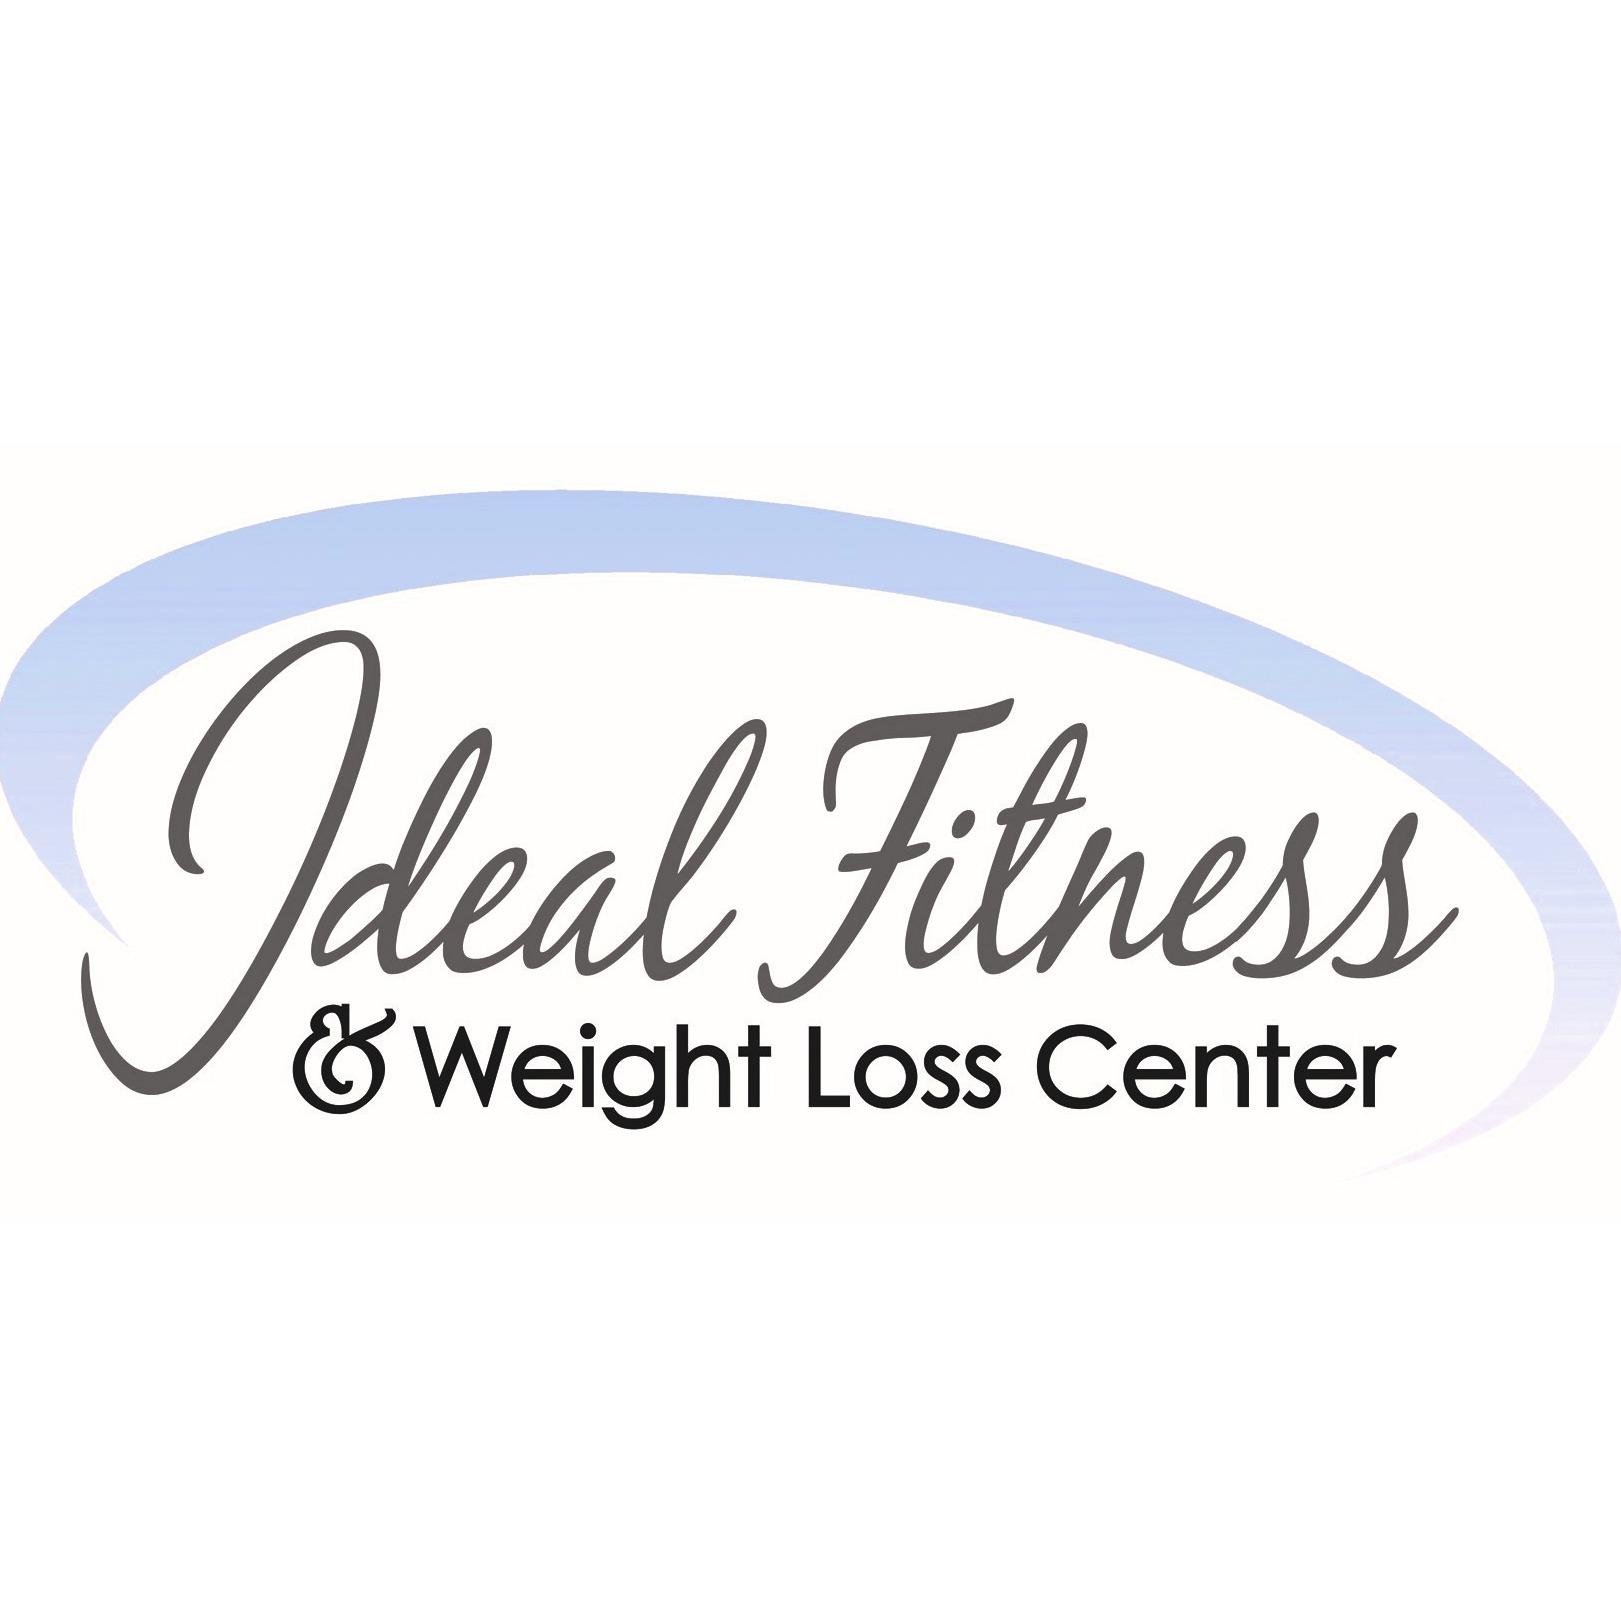 Ideal Physical Therapy & Fitness - Naples, FL 34114 - (239)272-3226 | ShowMeLocal.com